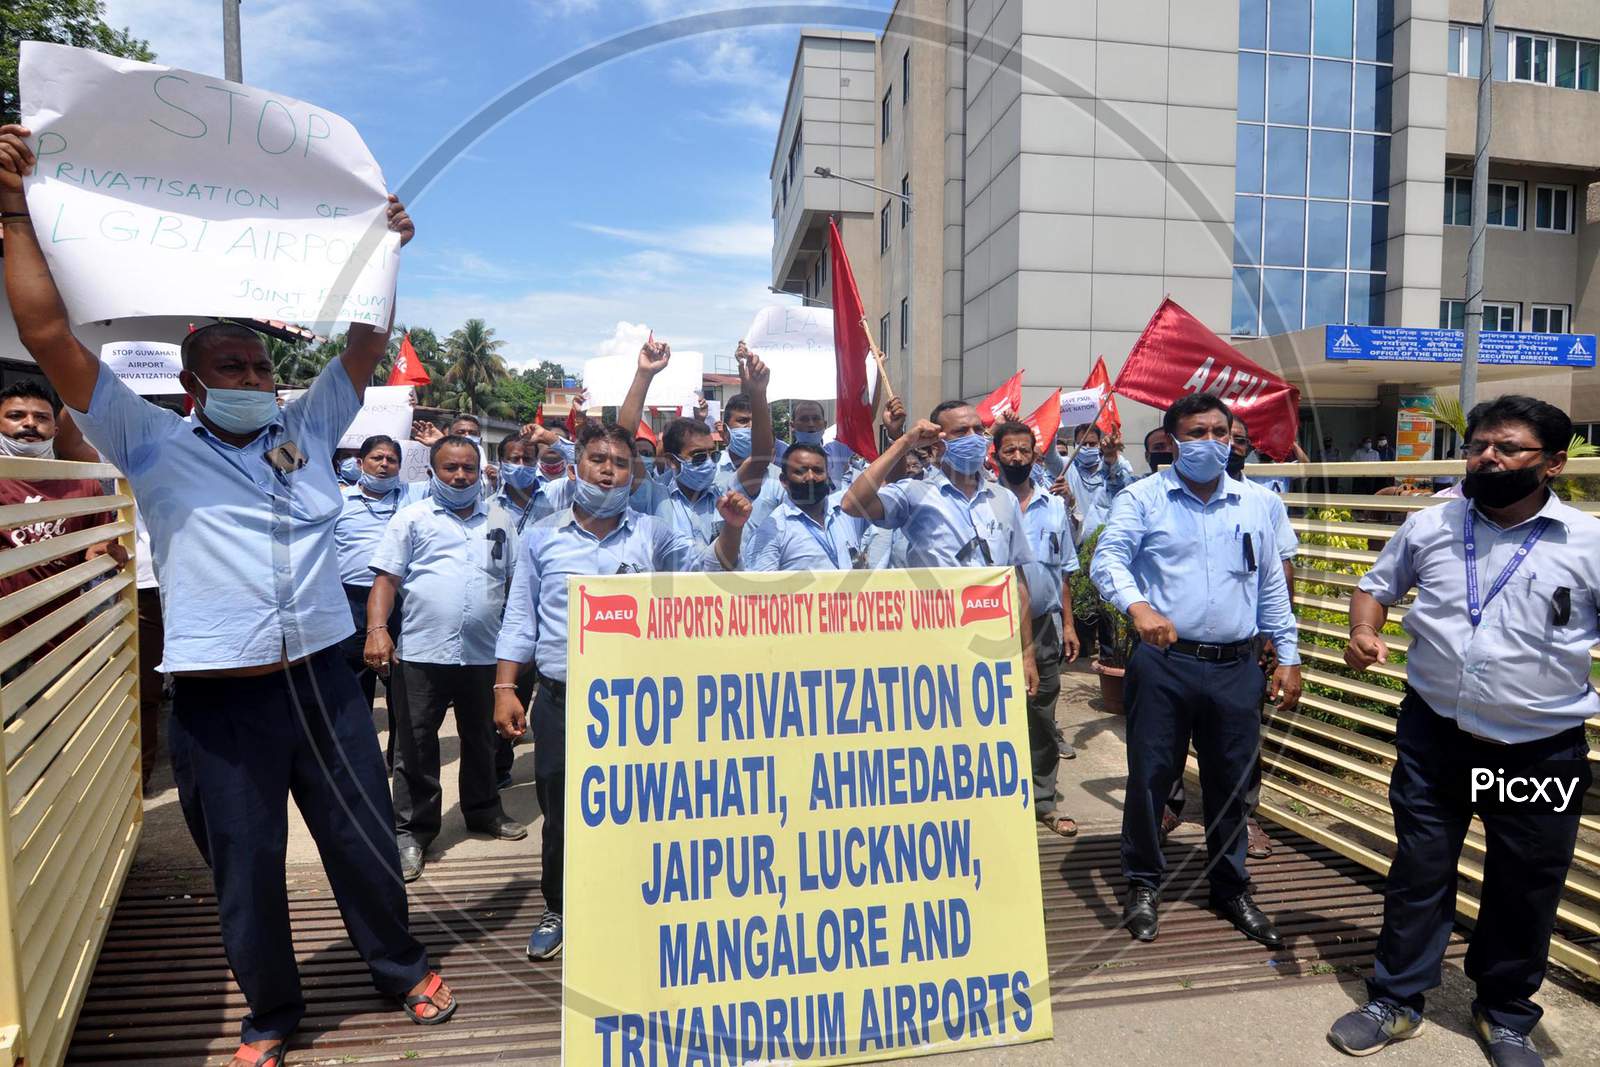 Members of Airports Authority Employees' Union (AAEU) stage a protest over Centre's approval to lease three airports, Jaipur, Guwahati and Thiruvananthapuram, under the public-private partnership (PPP) model, outside LGBI Airport in Guwahati, Monday, Aug. 24, 2020.